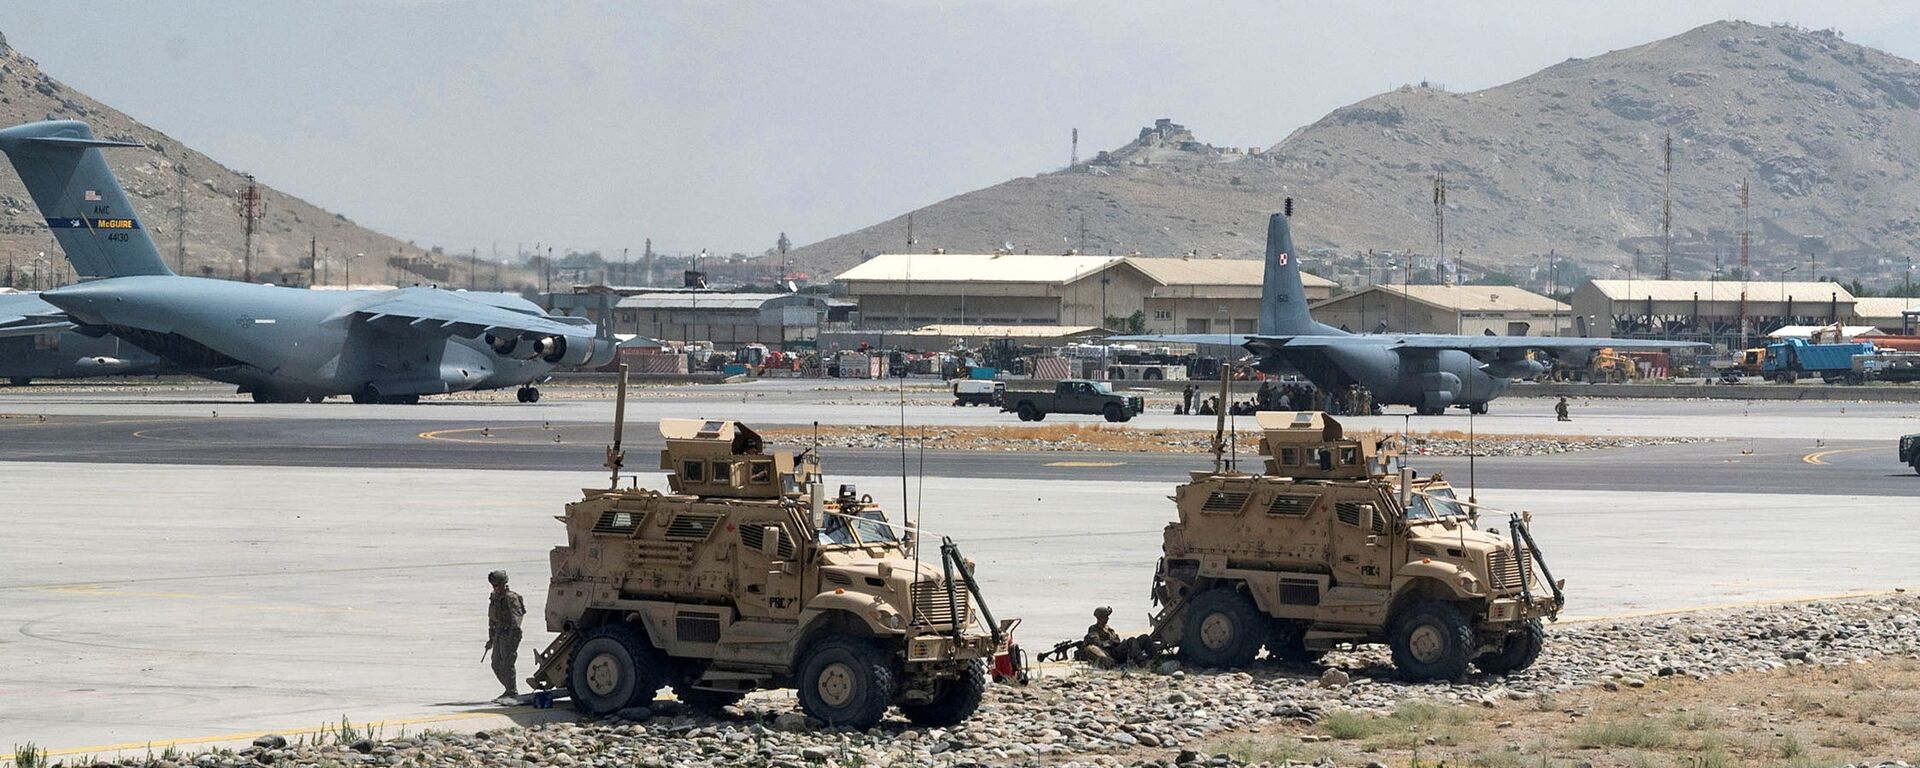 FILE PHOTO: FILE PHOTO: U.S. Army soldiers assigned to the 82nd Airborne Division patrol Hamid Karzai International Airport in Kabul, Afghanistan August 17, 2021. Picture taken August 17, 2021.  U.S. Air Force/Senior Airman Taylor Crul/Handout via REUTERS  THIS IMAGE HAS BEEN SUPPLIED BY A THIRD PARTY. THIS PICTURE WAS PROCESSED BY REUTERS TO ENHANCE QUALITY. AN UNPROCESSED VERSION HAS BEEN PROVIDED SEPARATELY./File Photo/File Photo - Sputnik International, 1920, 24.08.2021